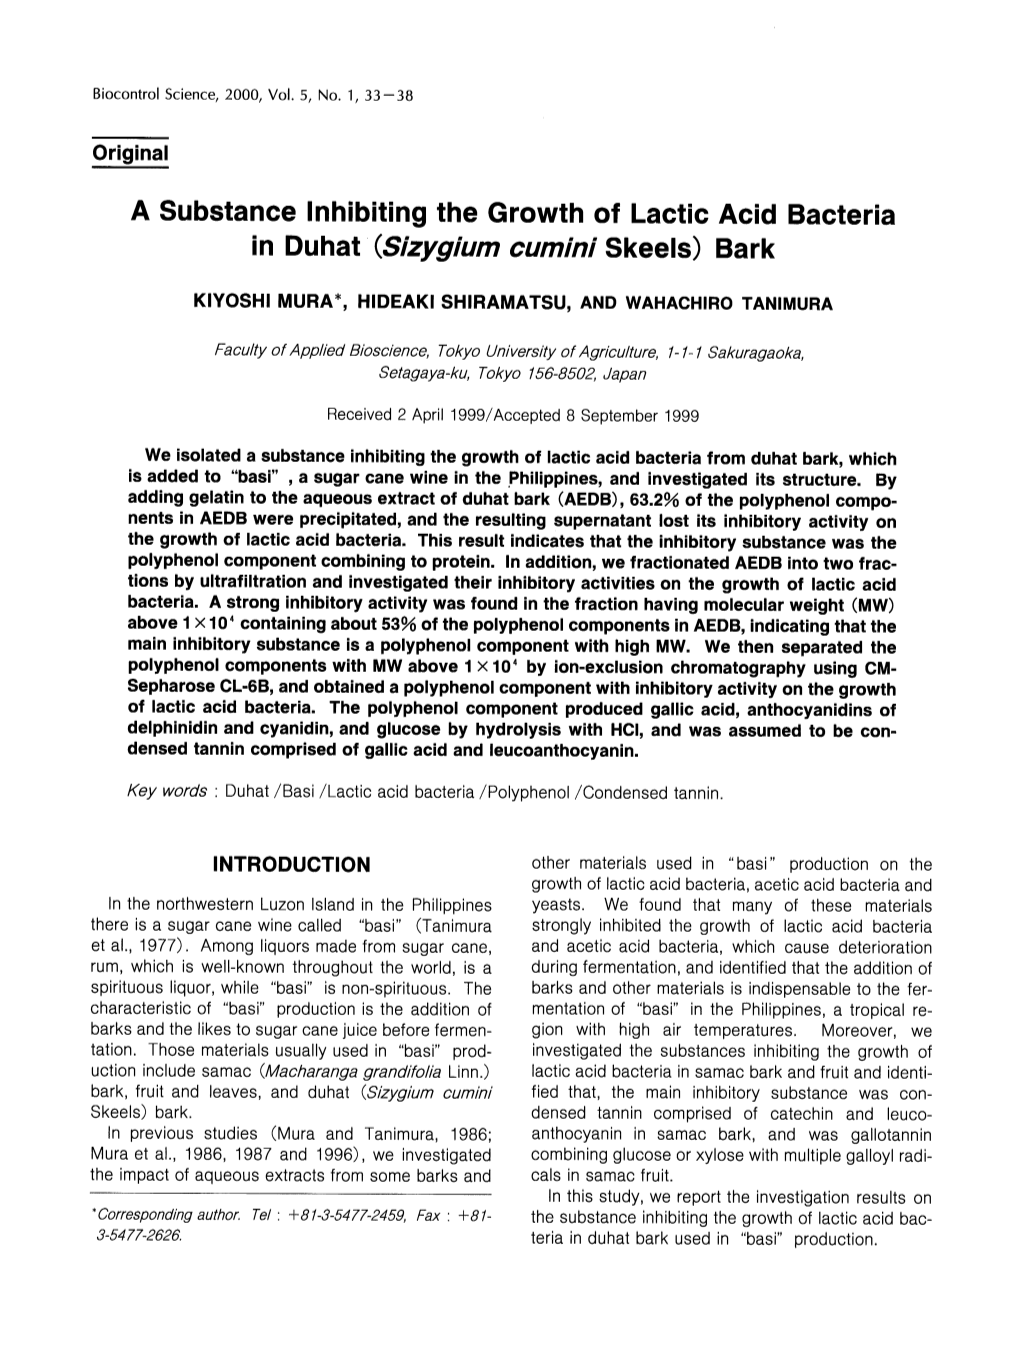 A Substance Inhibiting the Growth of Lactic Acid Bacteria in Duhat (Sizygium Cumini Skeels) Bark